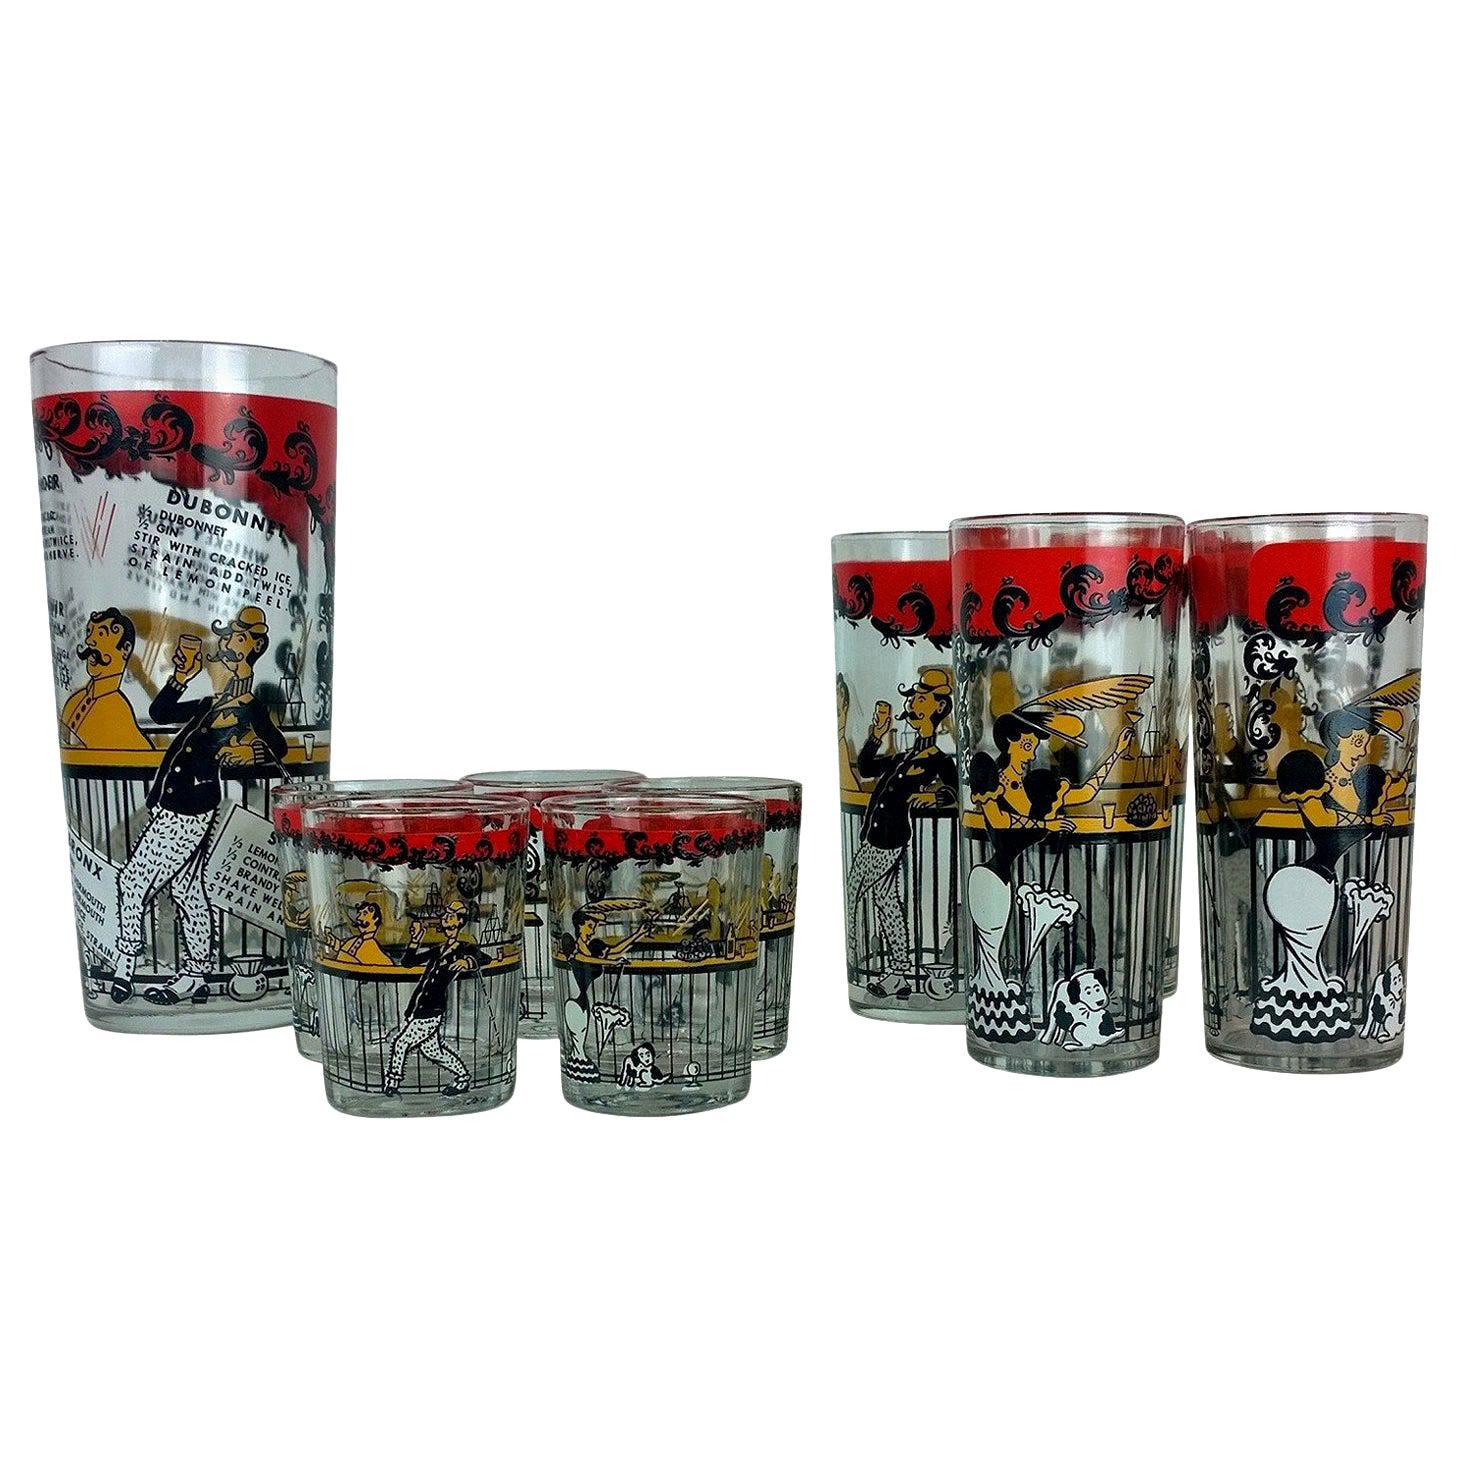 Set of 11 Red, Black & Gold Moulin Rouge Theme Overlay Cocktail Glasses & Shaker For Sale